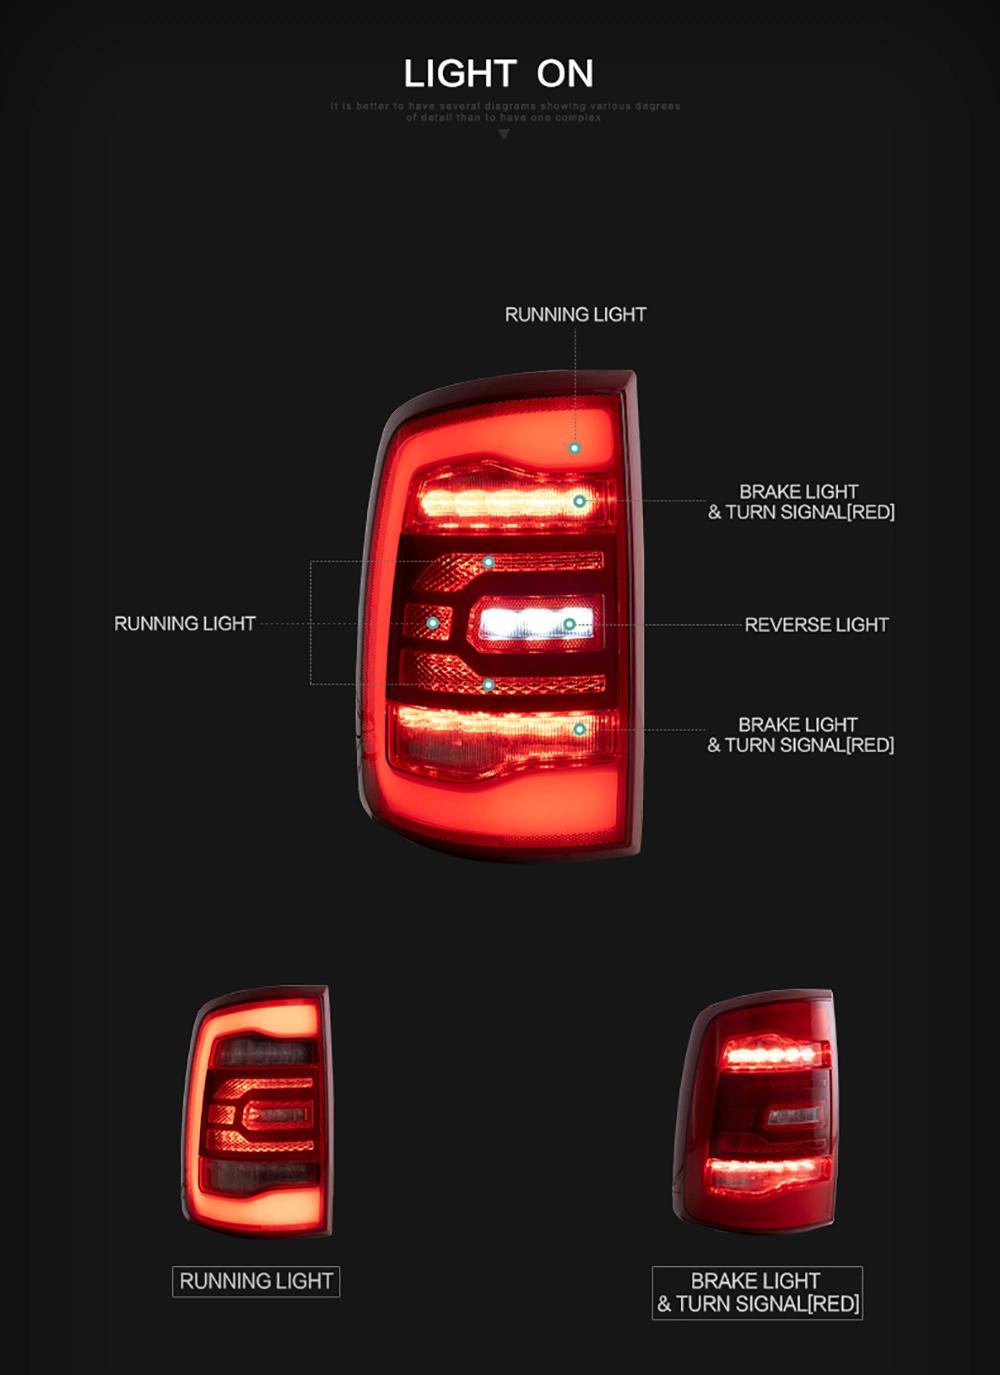 RAM 1500 LED Taillight 2009 2012 2015 2018 RAM with Red Flashing Signal